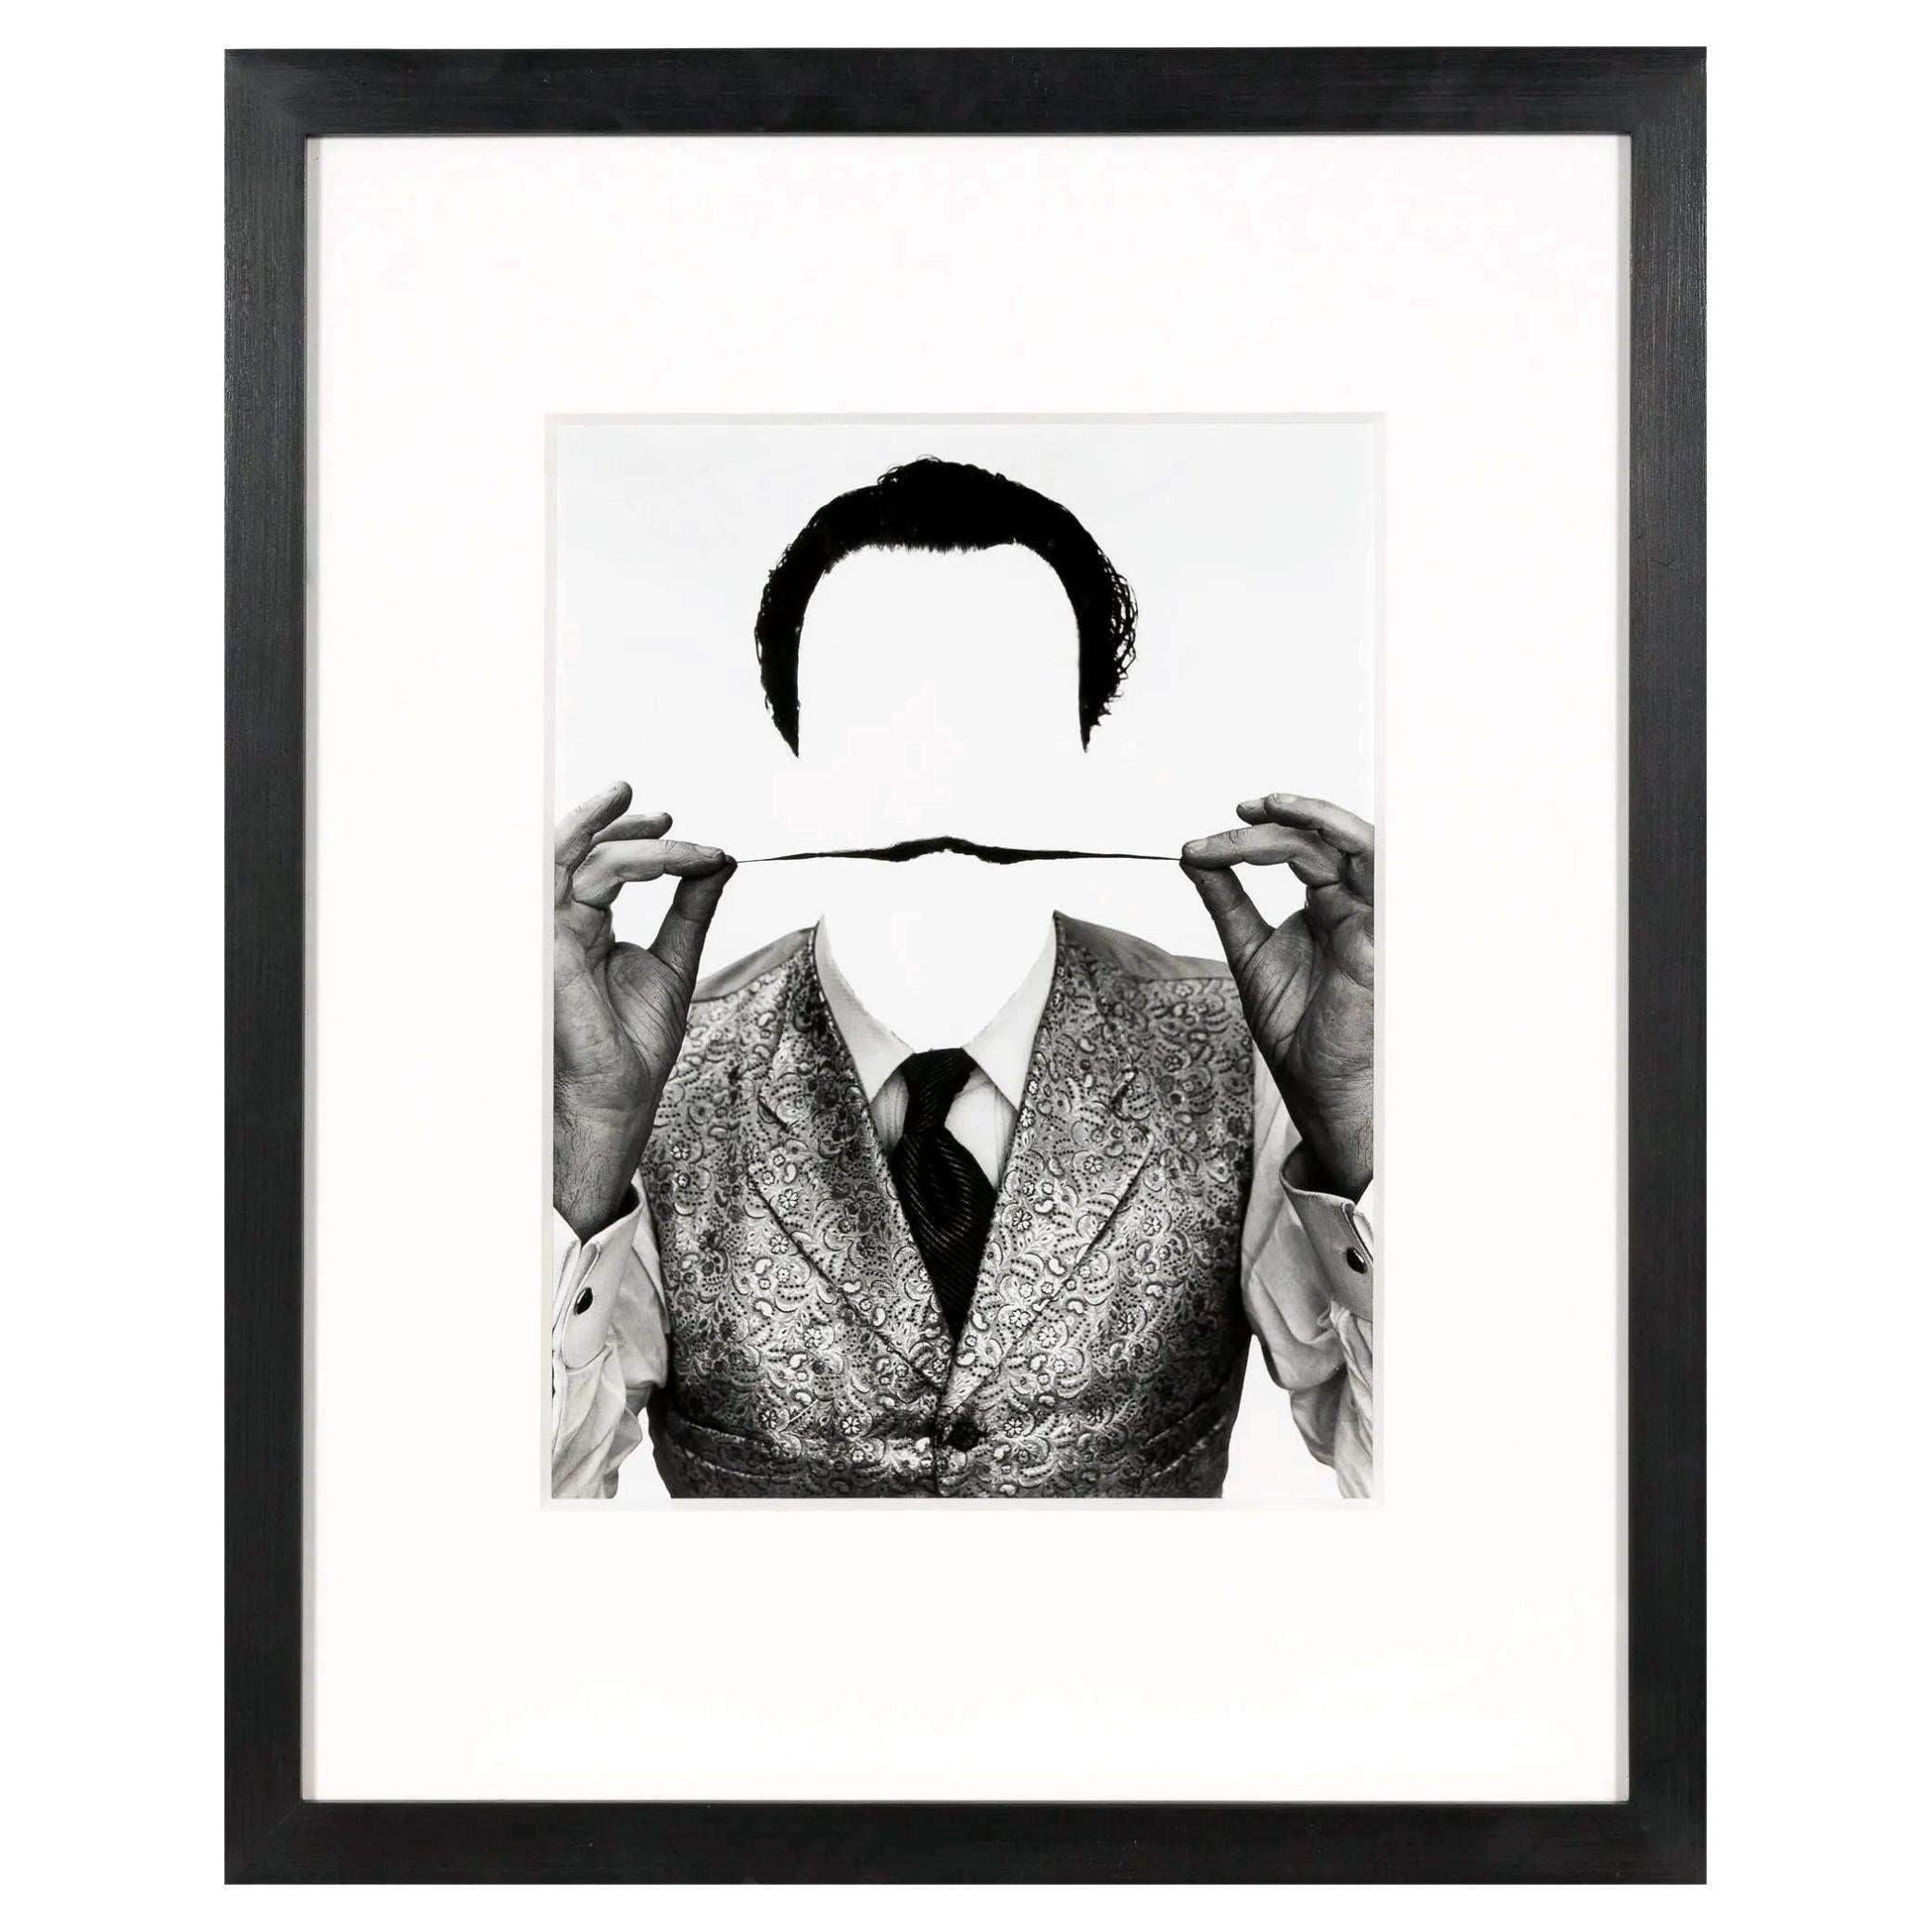 Framed Edition Dali Photograph by Philippe Halsman For Sale